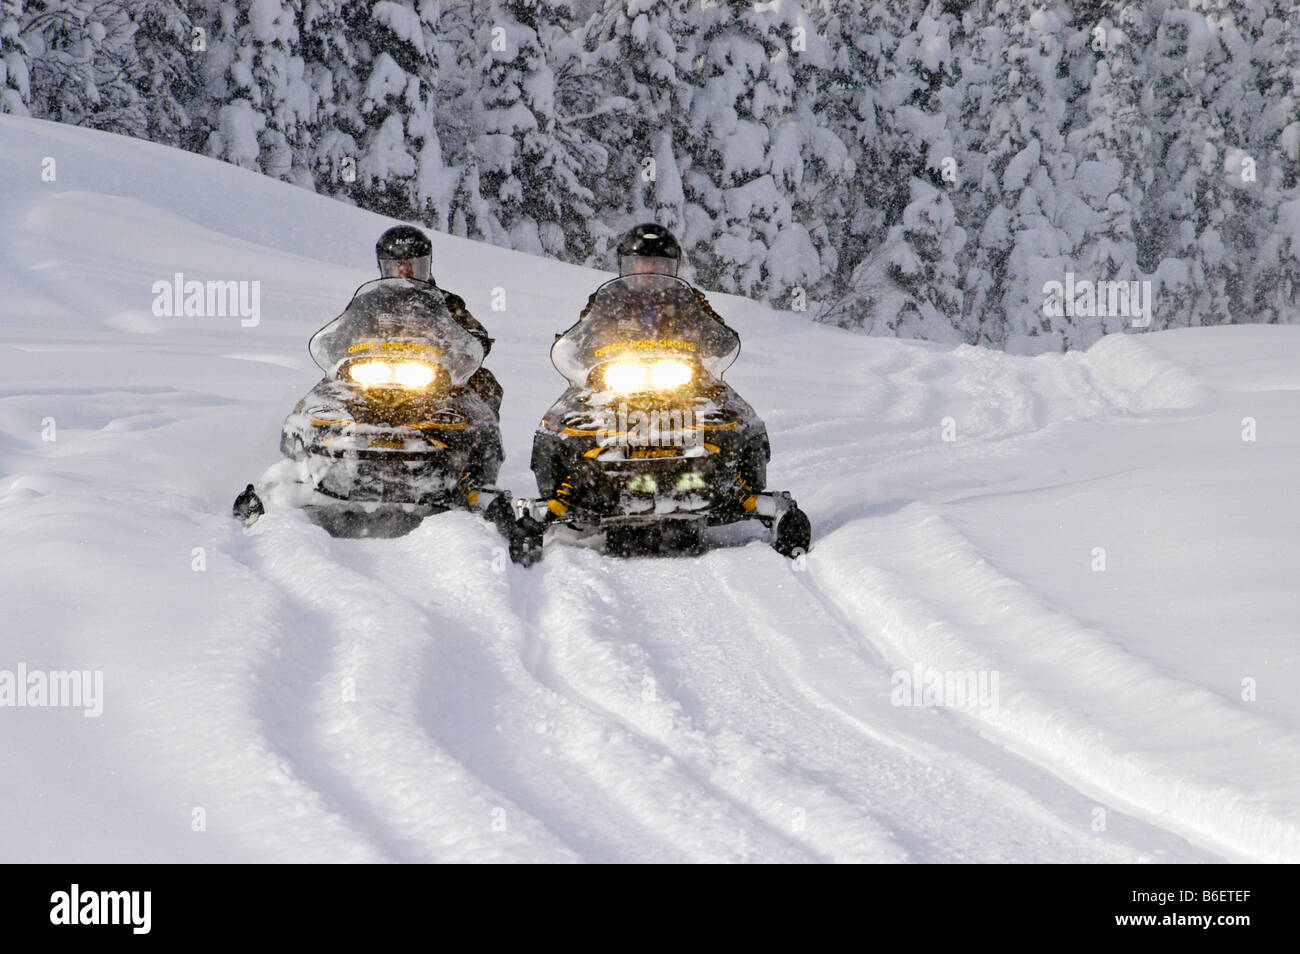 Snow mobile, snow mobiles in the snow, Saguenay Lac Saint Jean Region, Mont Valin, Quebec, Canada, North America Stock Photo